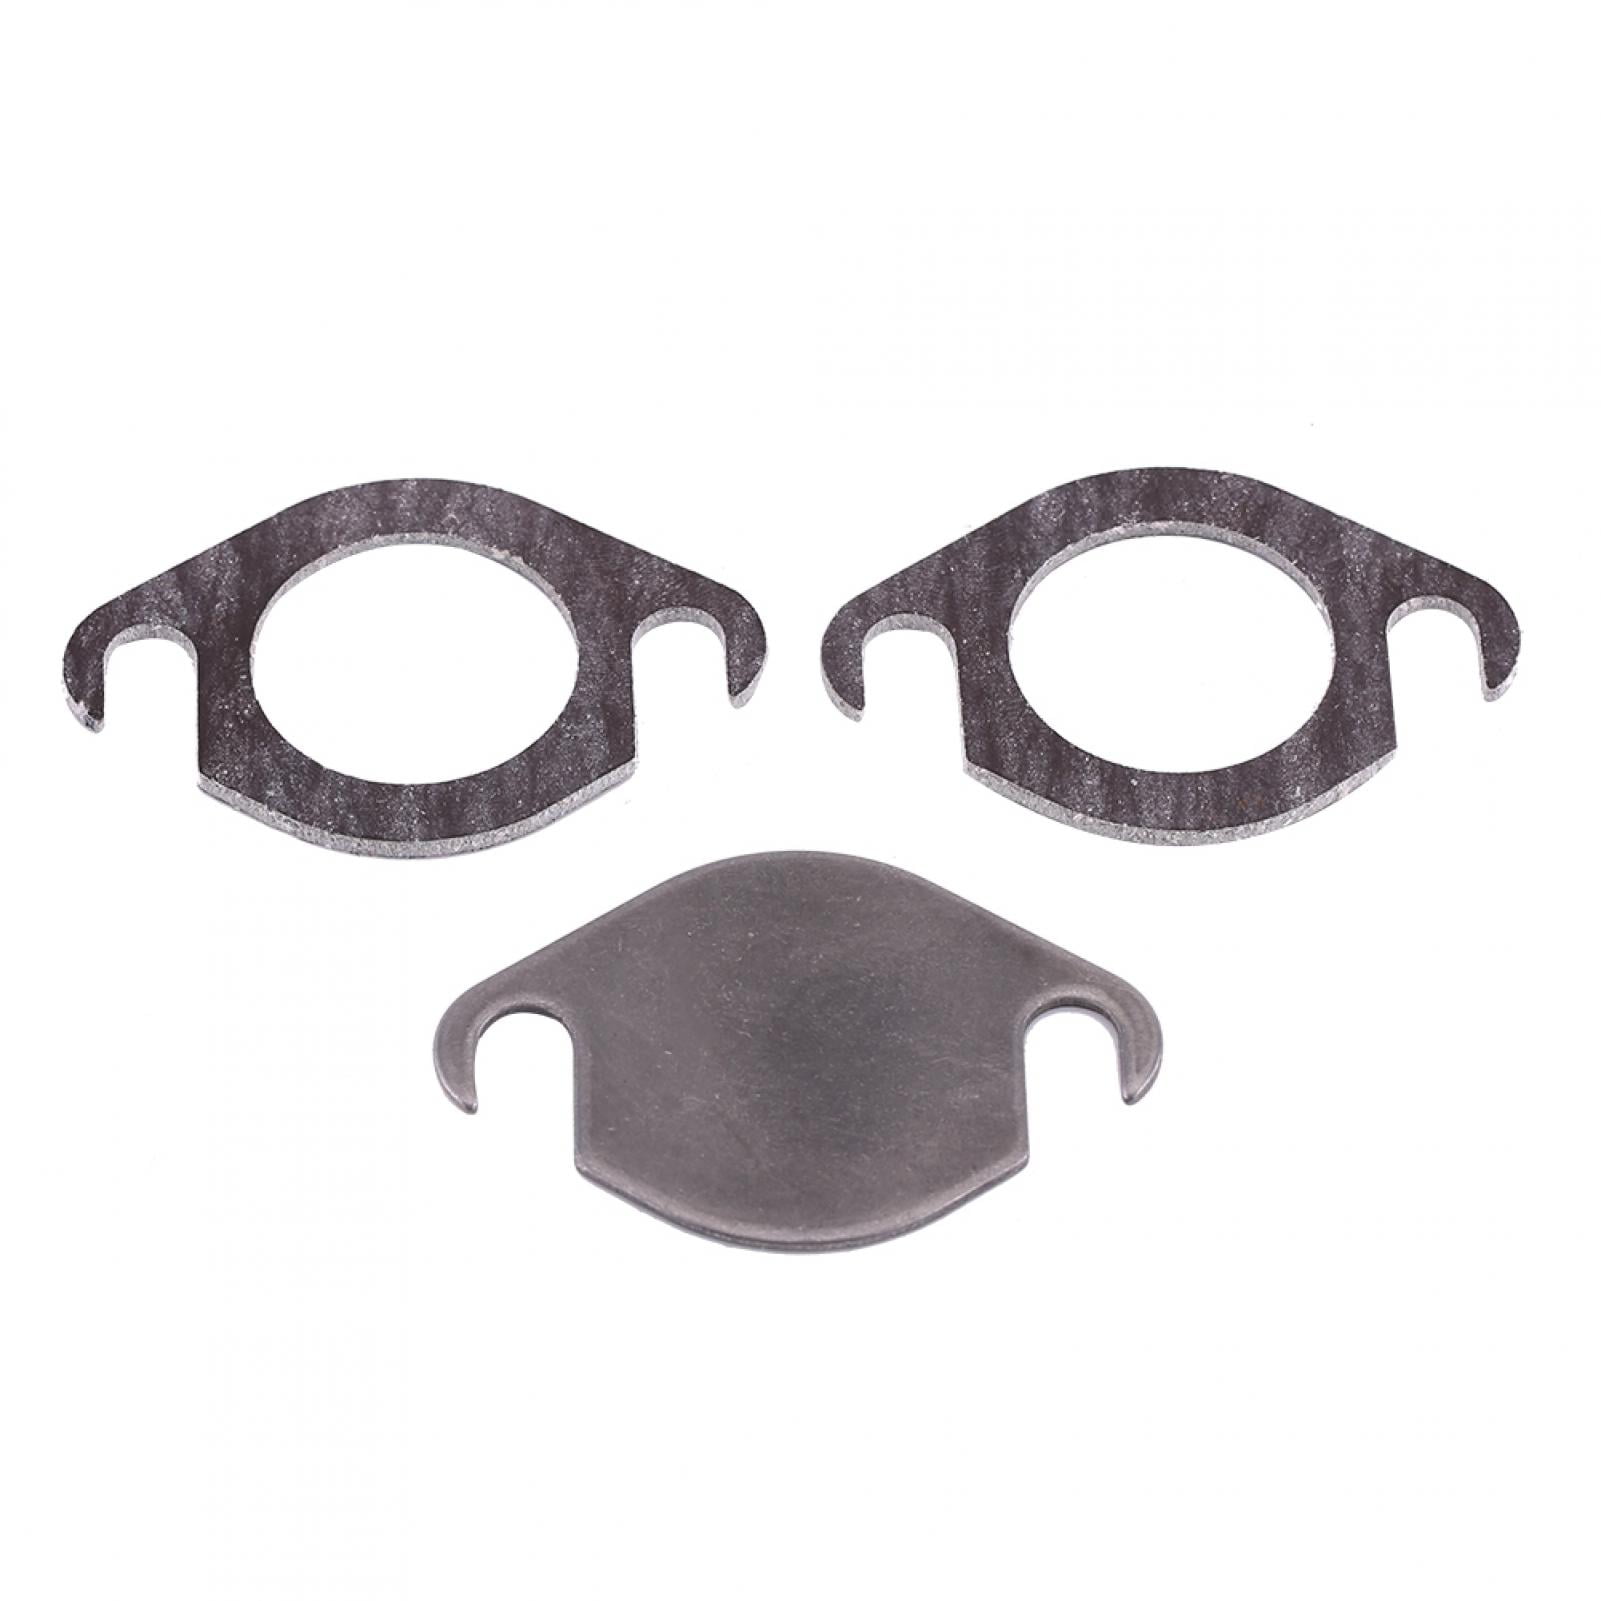 EGR Valve Blanking Plate Kit with Gasket 